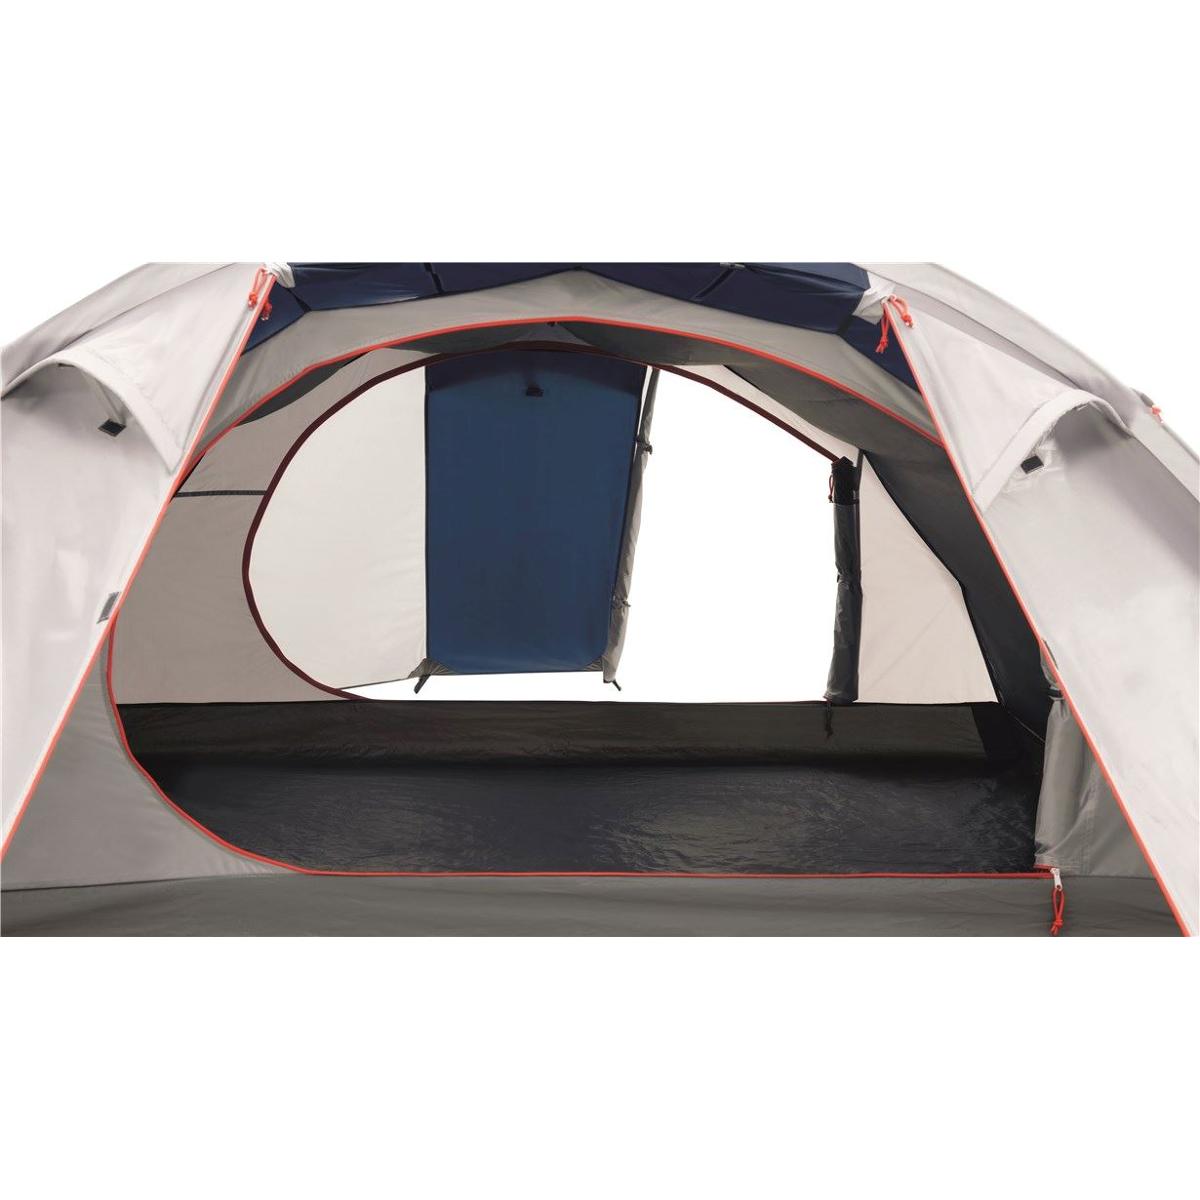 Easy Camp Vega 300 Compact Tunnelzelt, 3-Personen, 240x235cm, blau bei  Camping Wagner Campingzubehör